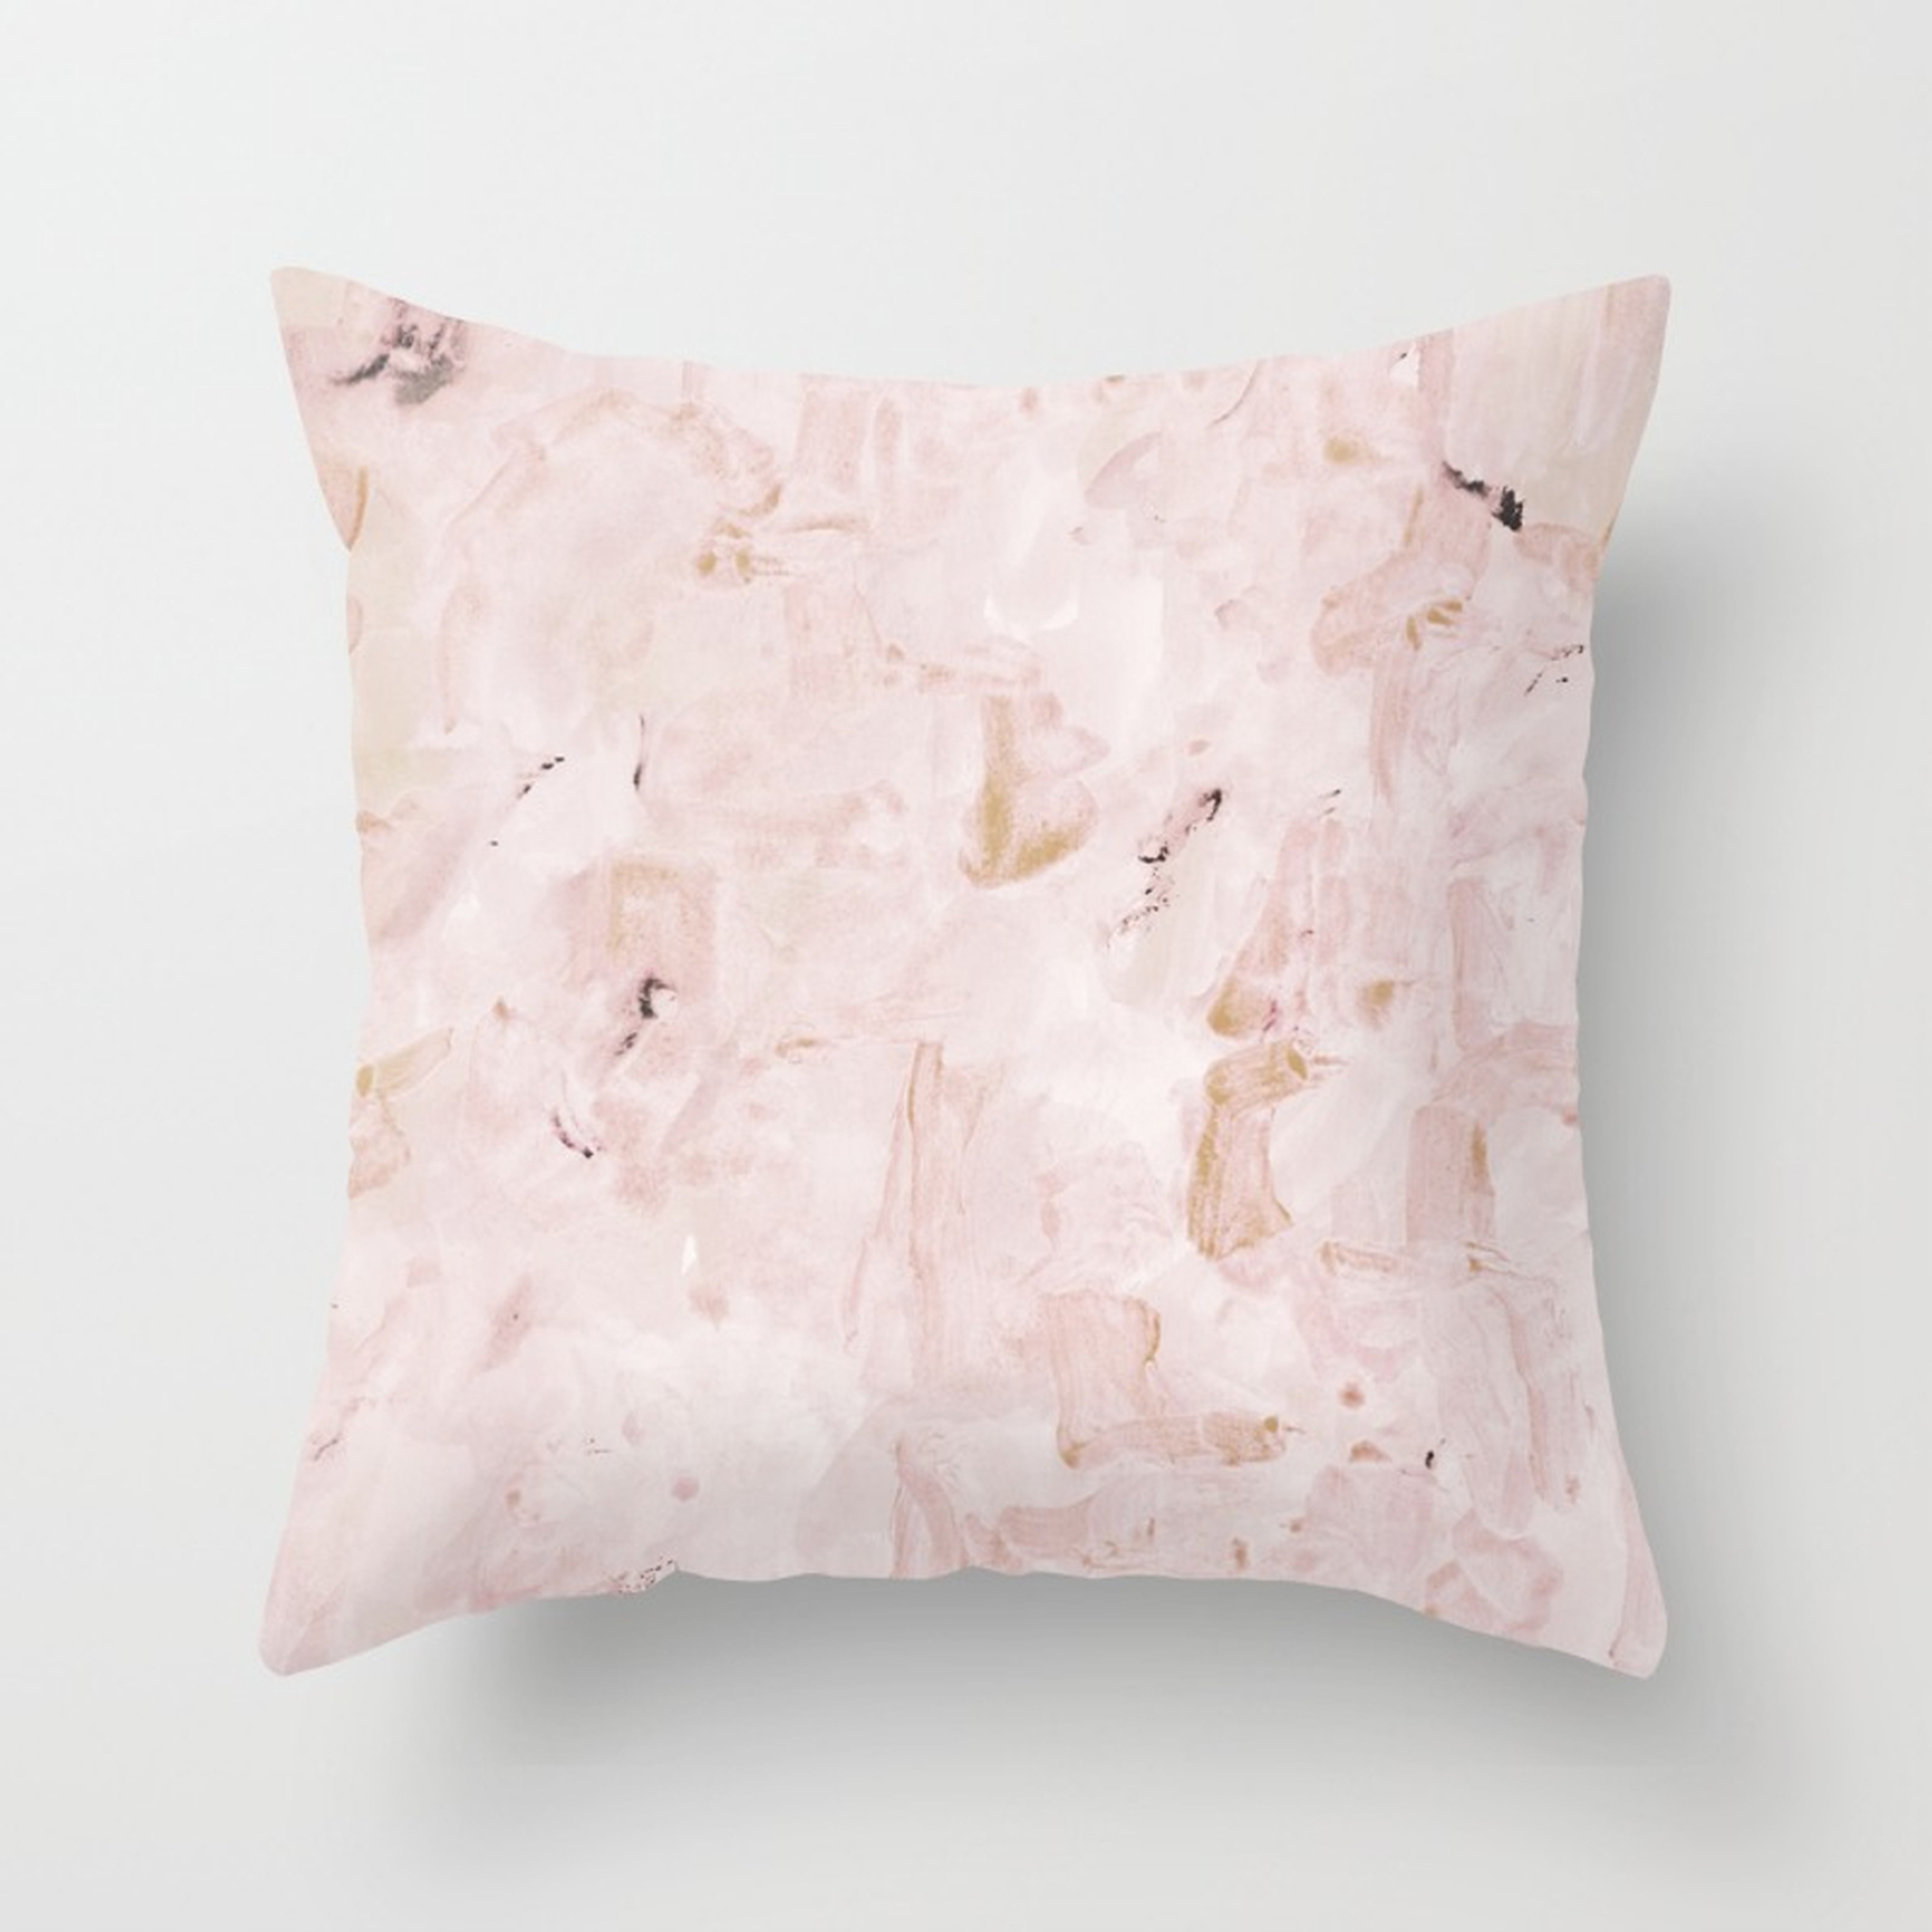 Abstract-soft Pink Throw Pillow by Georgiana Paraschiv - Cover (16" x 16") With Pillow Insert - Indoor Pillow - Society6